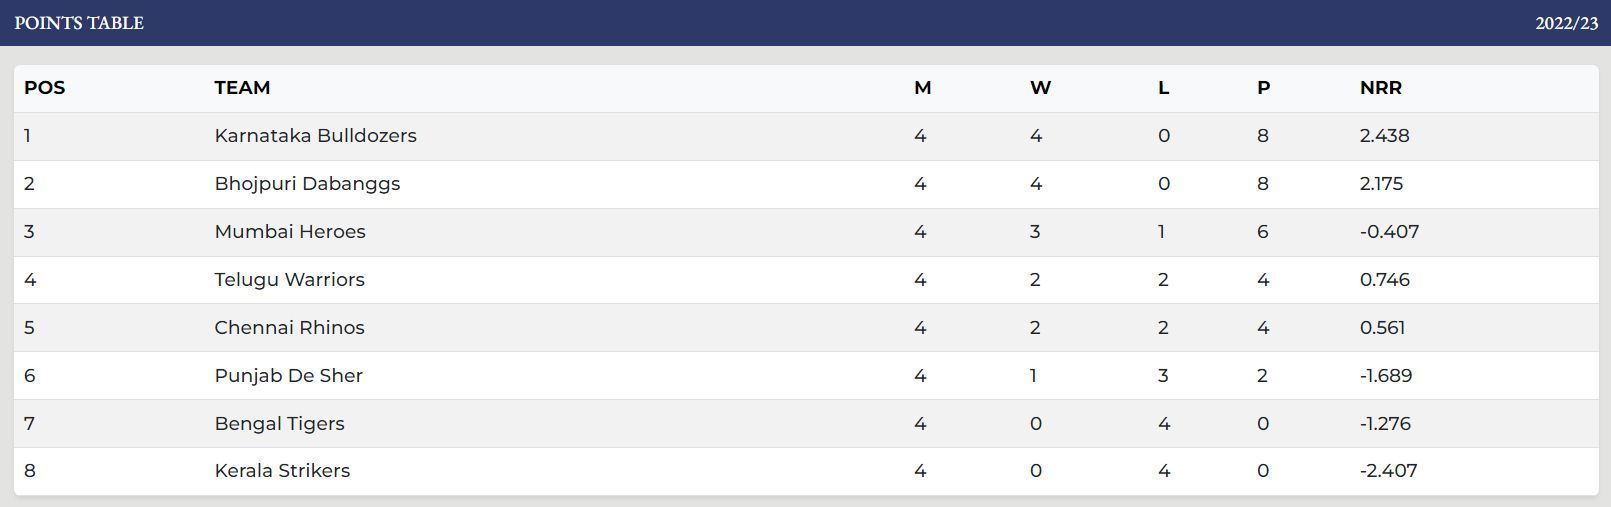 Updated Points Table after Match 16 (Image Courtesy: www.ccl.in)